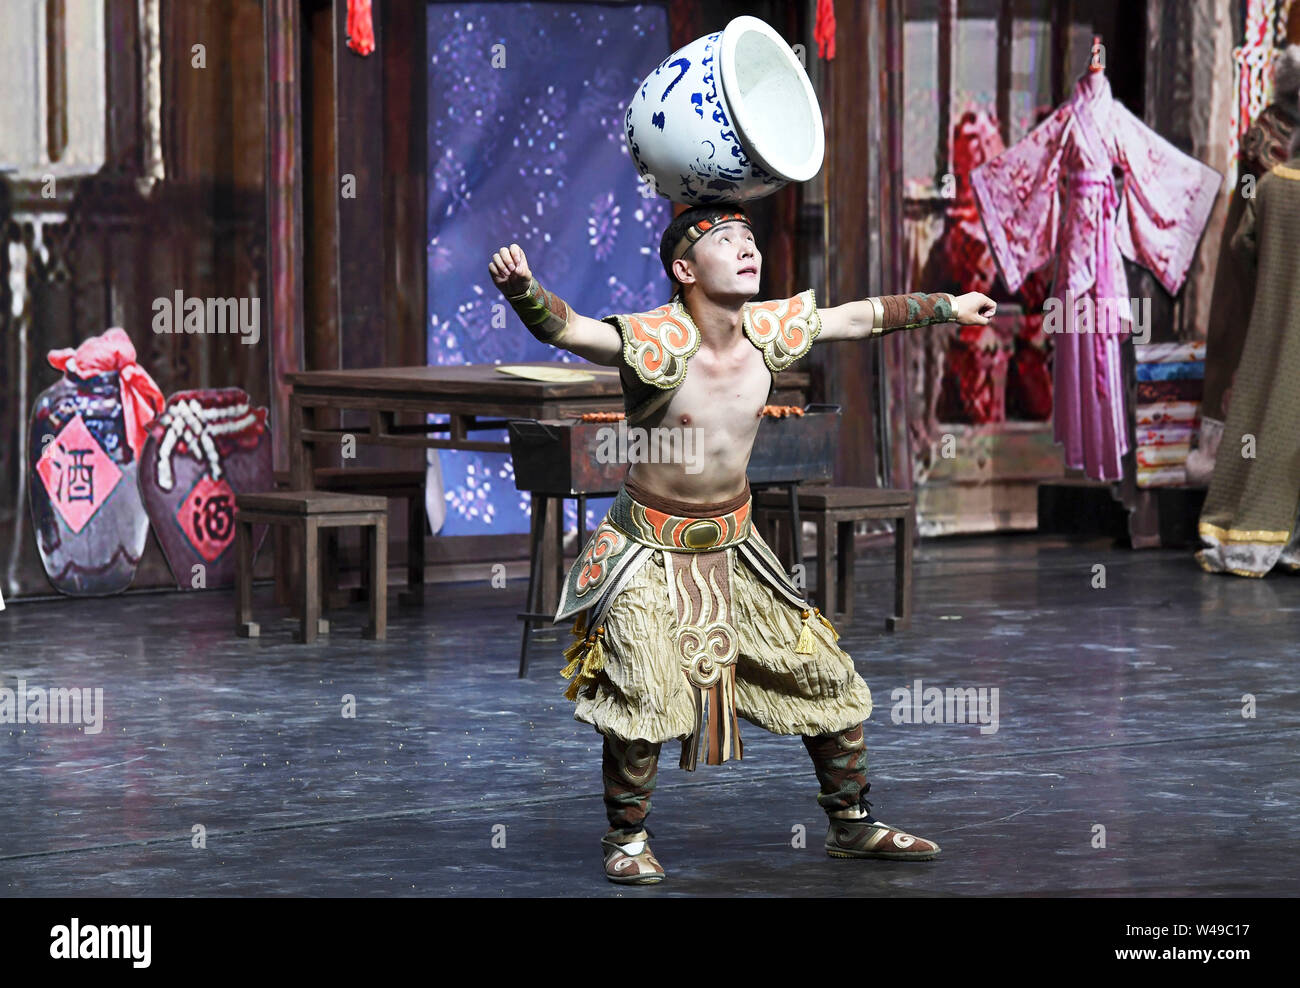 Zhangye, China's Gansu Province. 21st July, 2019. A performer acts out a scene during the debut of a new stage drama which depicts the history of Zhangye as a key Silk Road trade and cultural exchange hub at the Danxiakou tourism area in Linze County of Zhangye, northwest China's Gansu Province, July 21, 2019. Credit: Fan Peishen/Xinhua/Alamy Live News Stock Photo